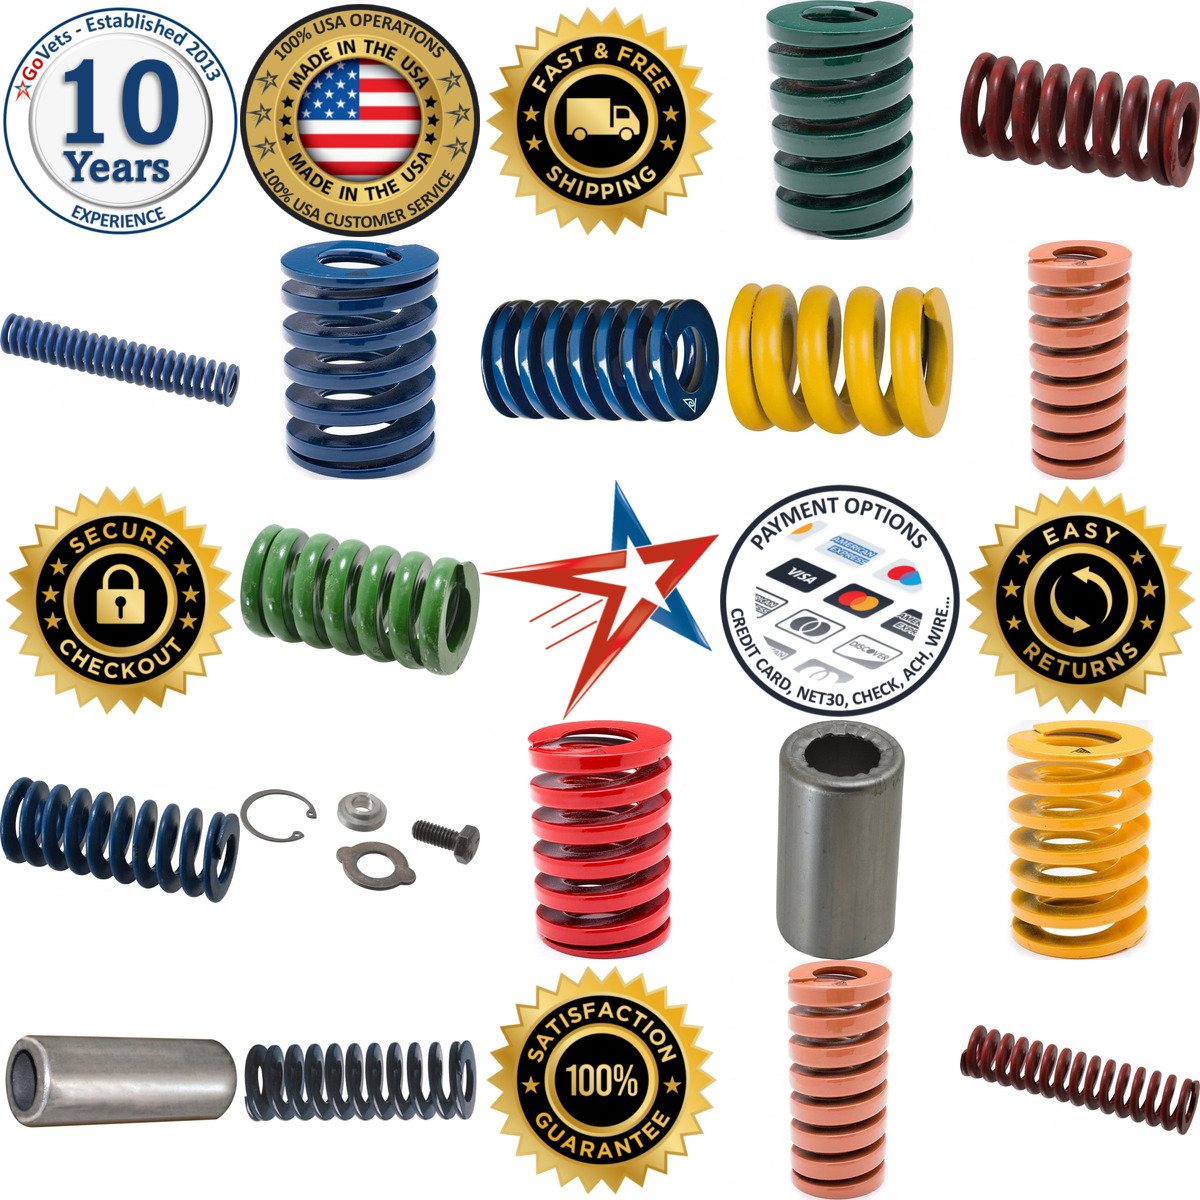 A selection of Die Springs and Accessories products on GoVets